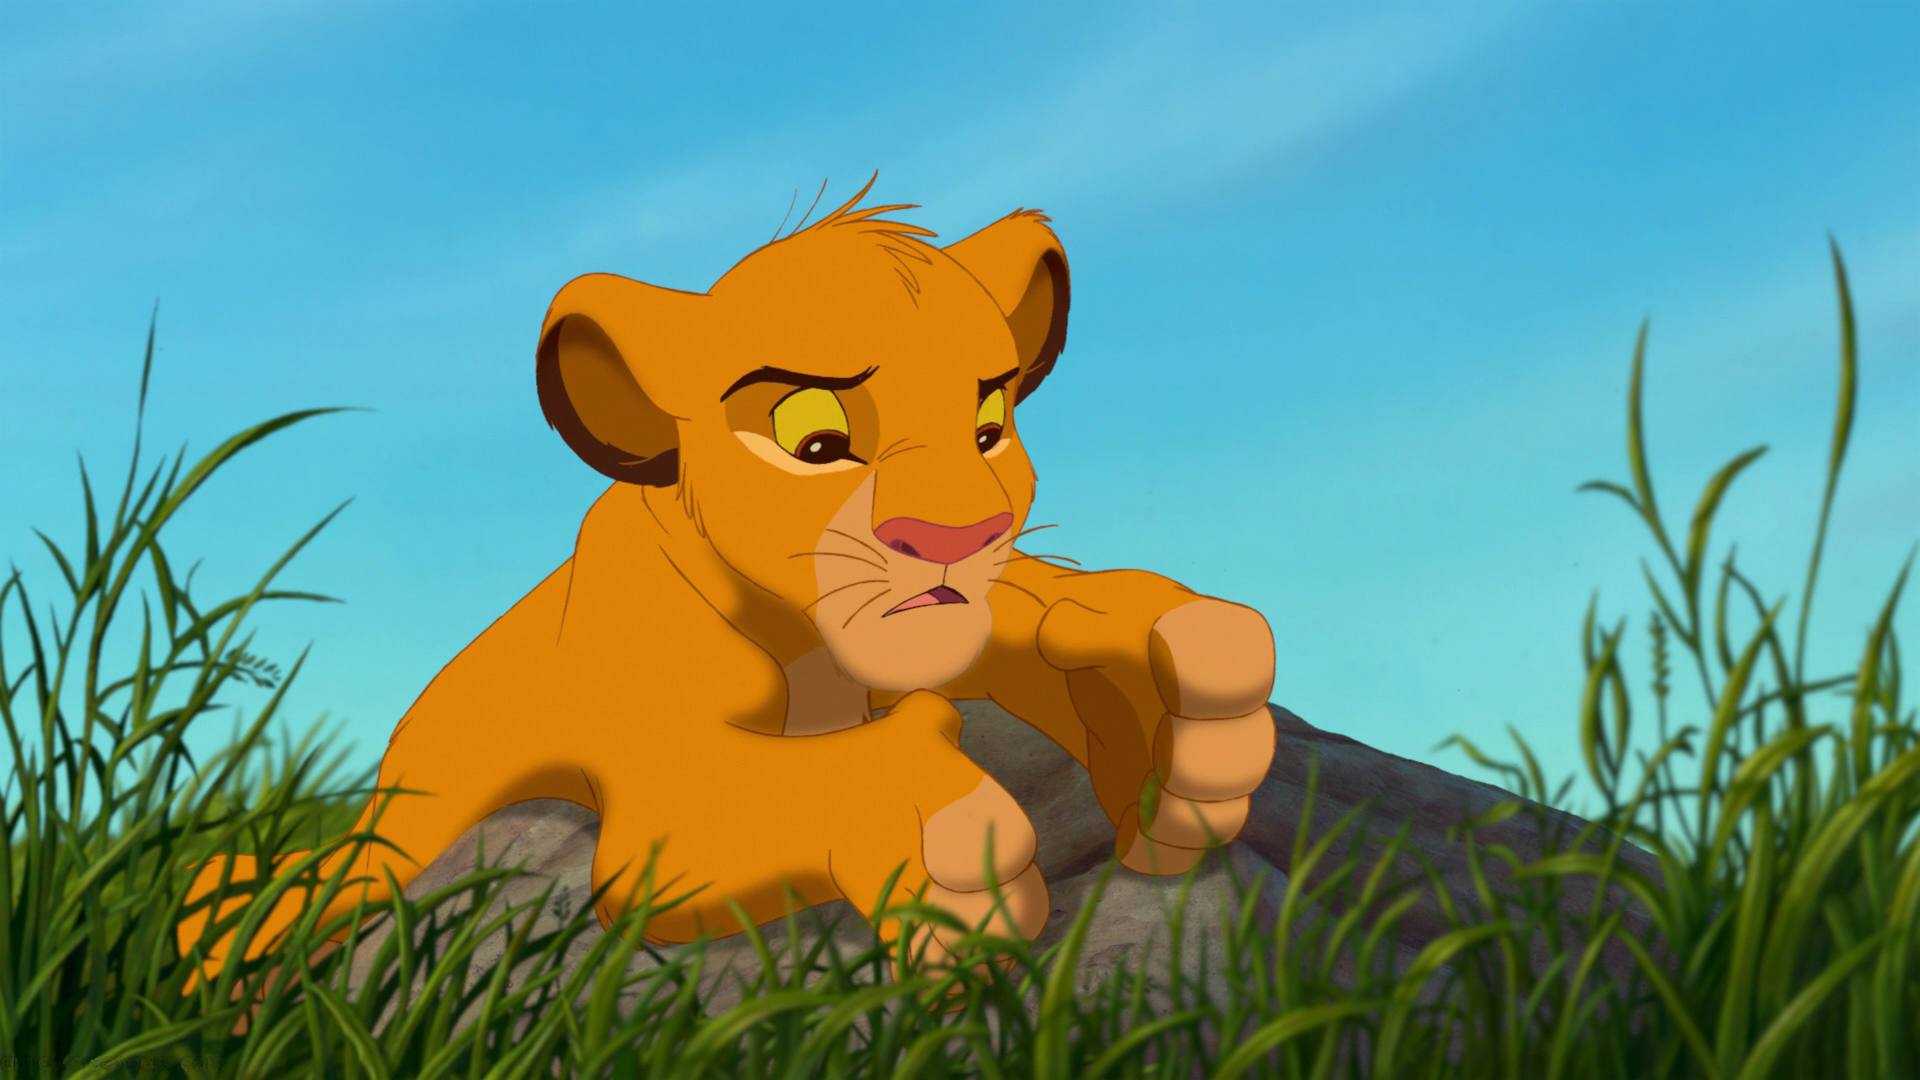 The Lion King Cartoon Adventures Of The Young Lion Simba Wallpaper Hd  1920x1080 : 